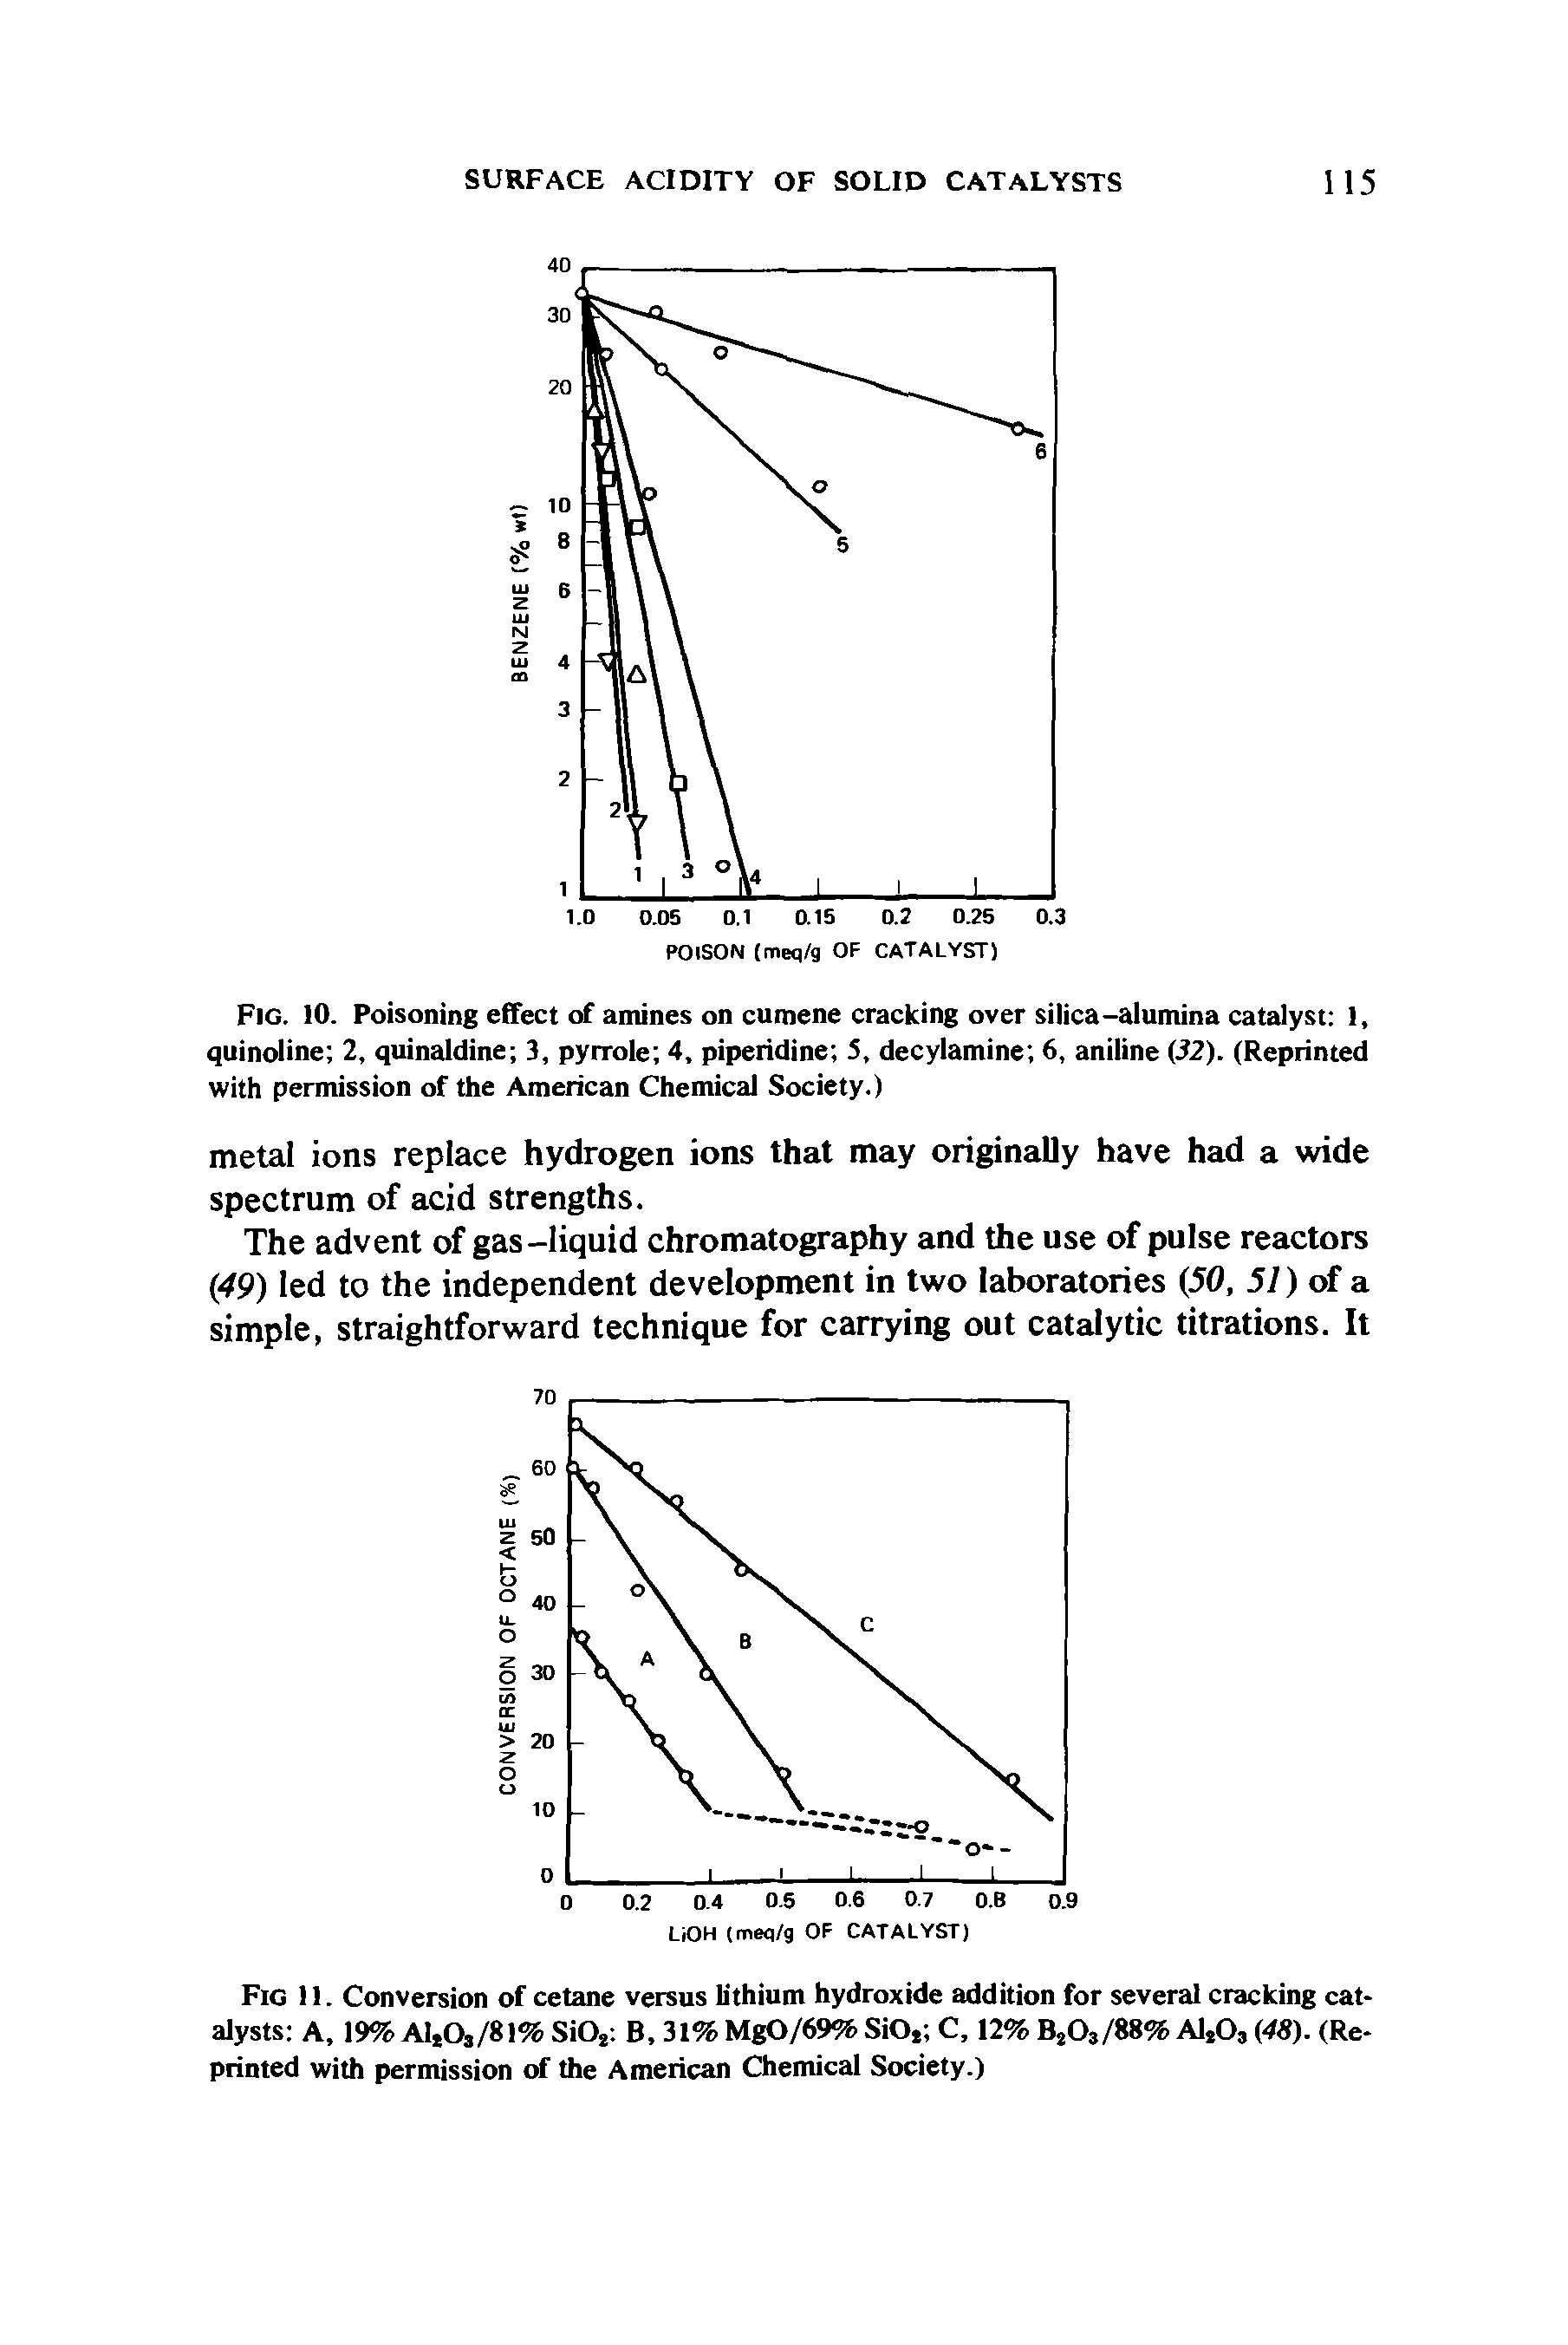 Fig. 10. Poisoning effect of amines on cumene cracking over silica-alumina catalyst 1, quinoline 2, quinaldine 3, pyrrole 4, piperidine 5, decylamine 6, aniline (32). (Reprinted with permission of the American Chemical Society.)...